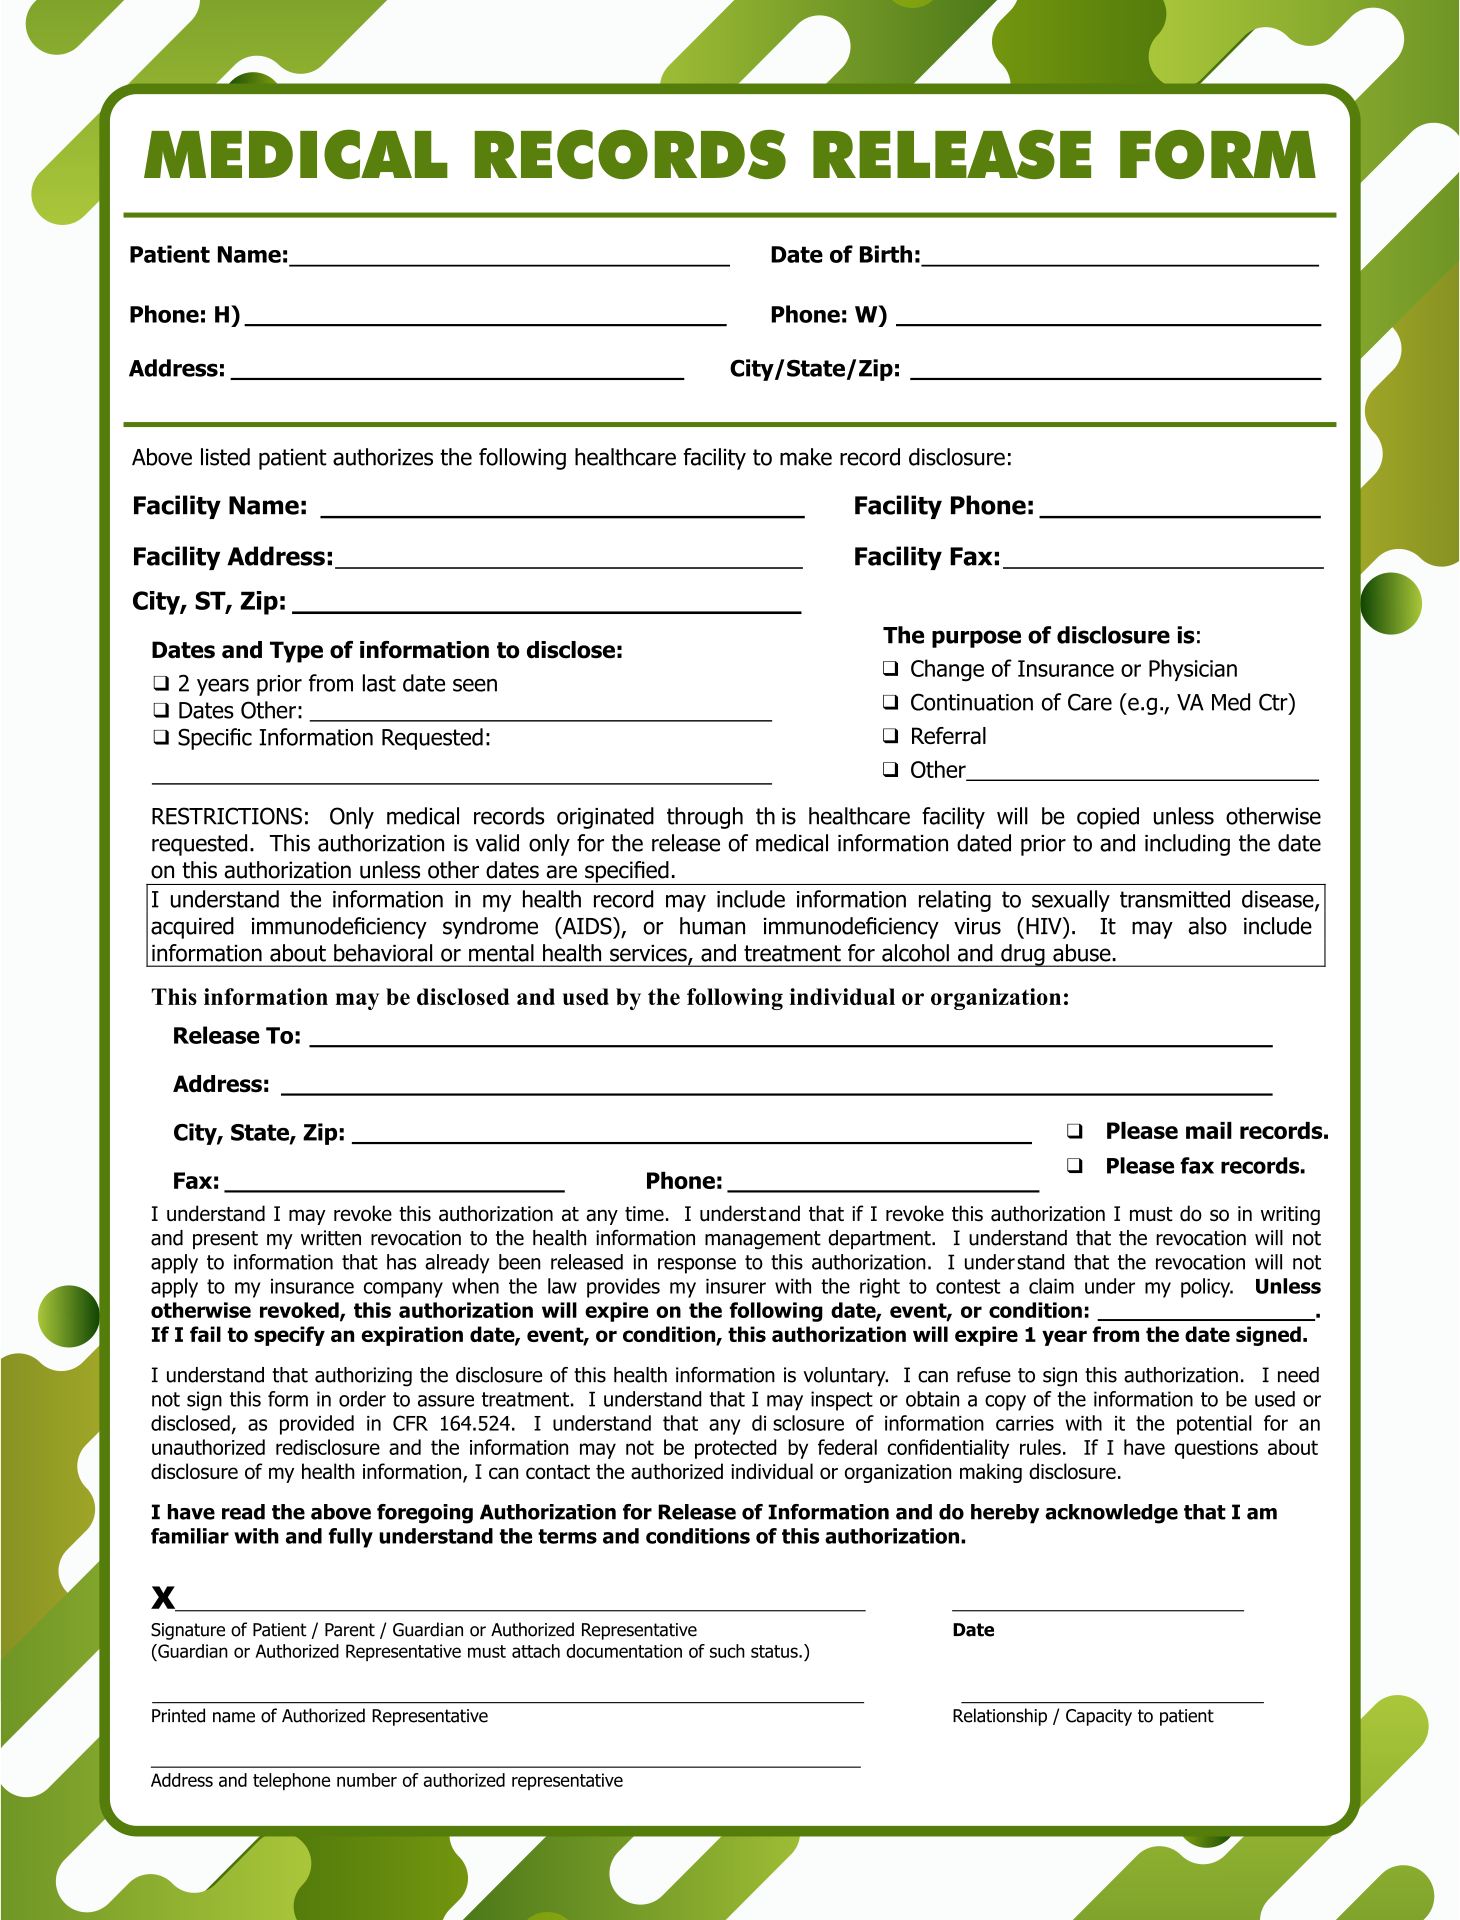 printable-template-medical-records-release-form-printable-templates